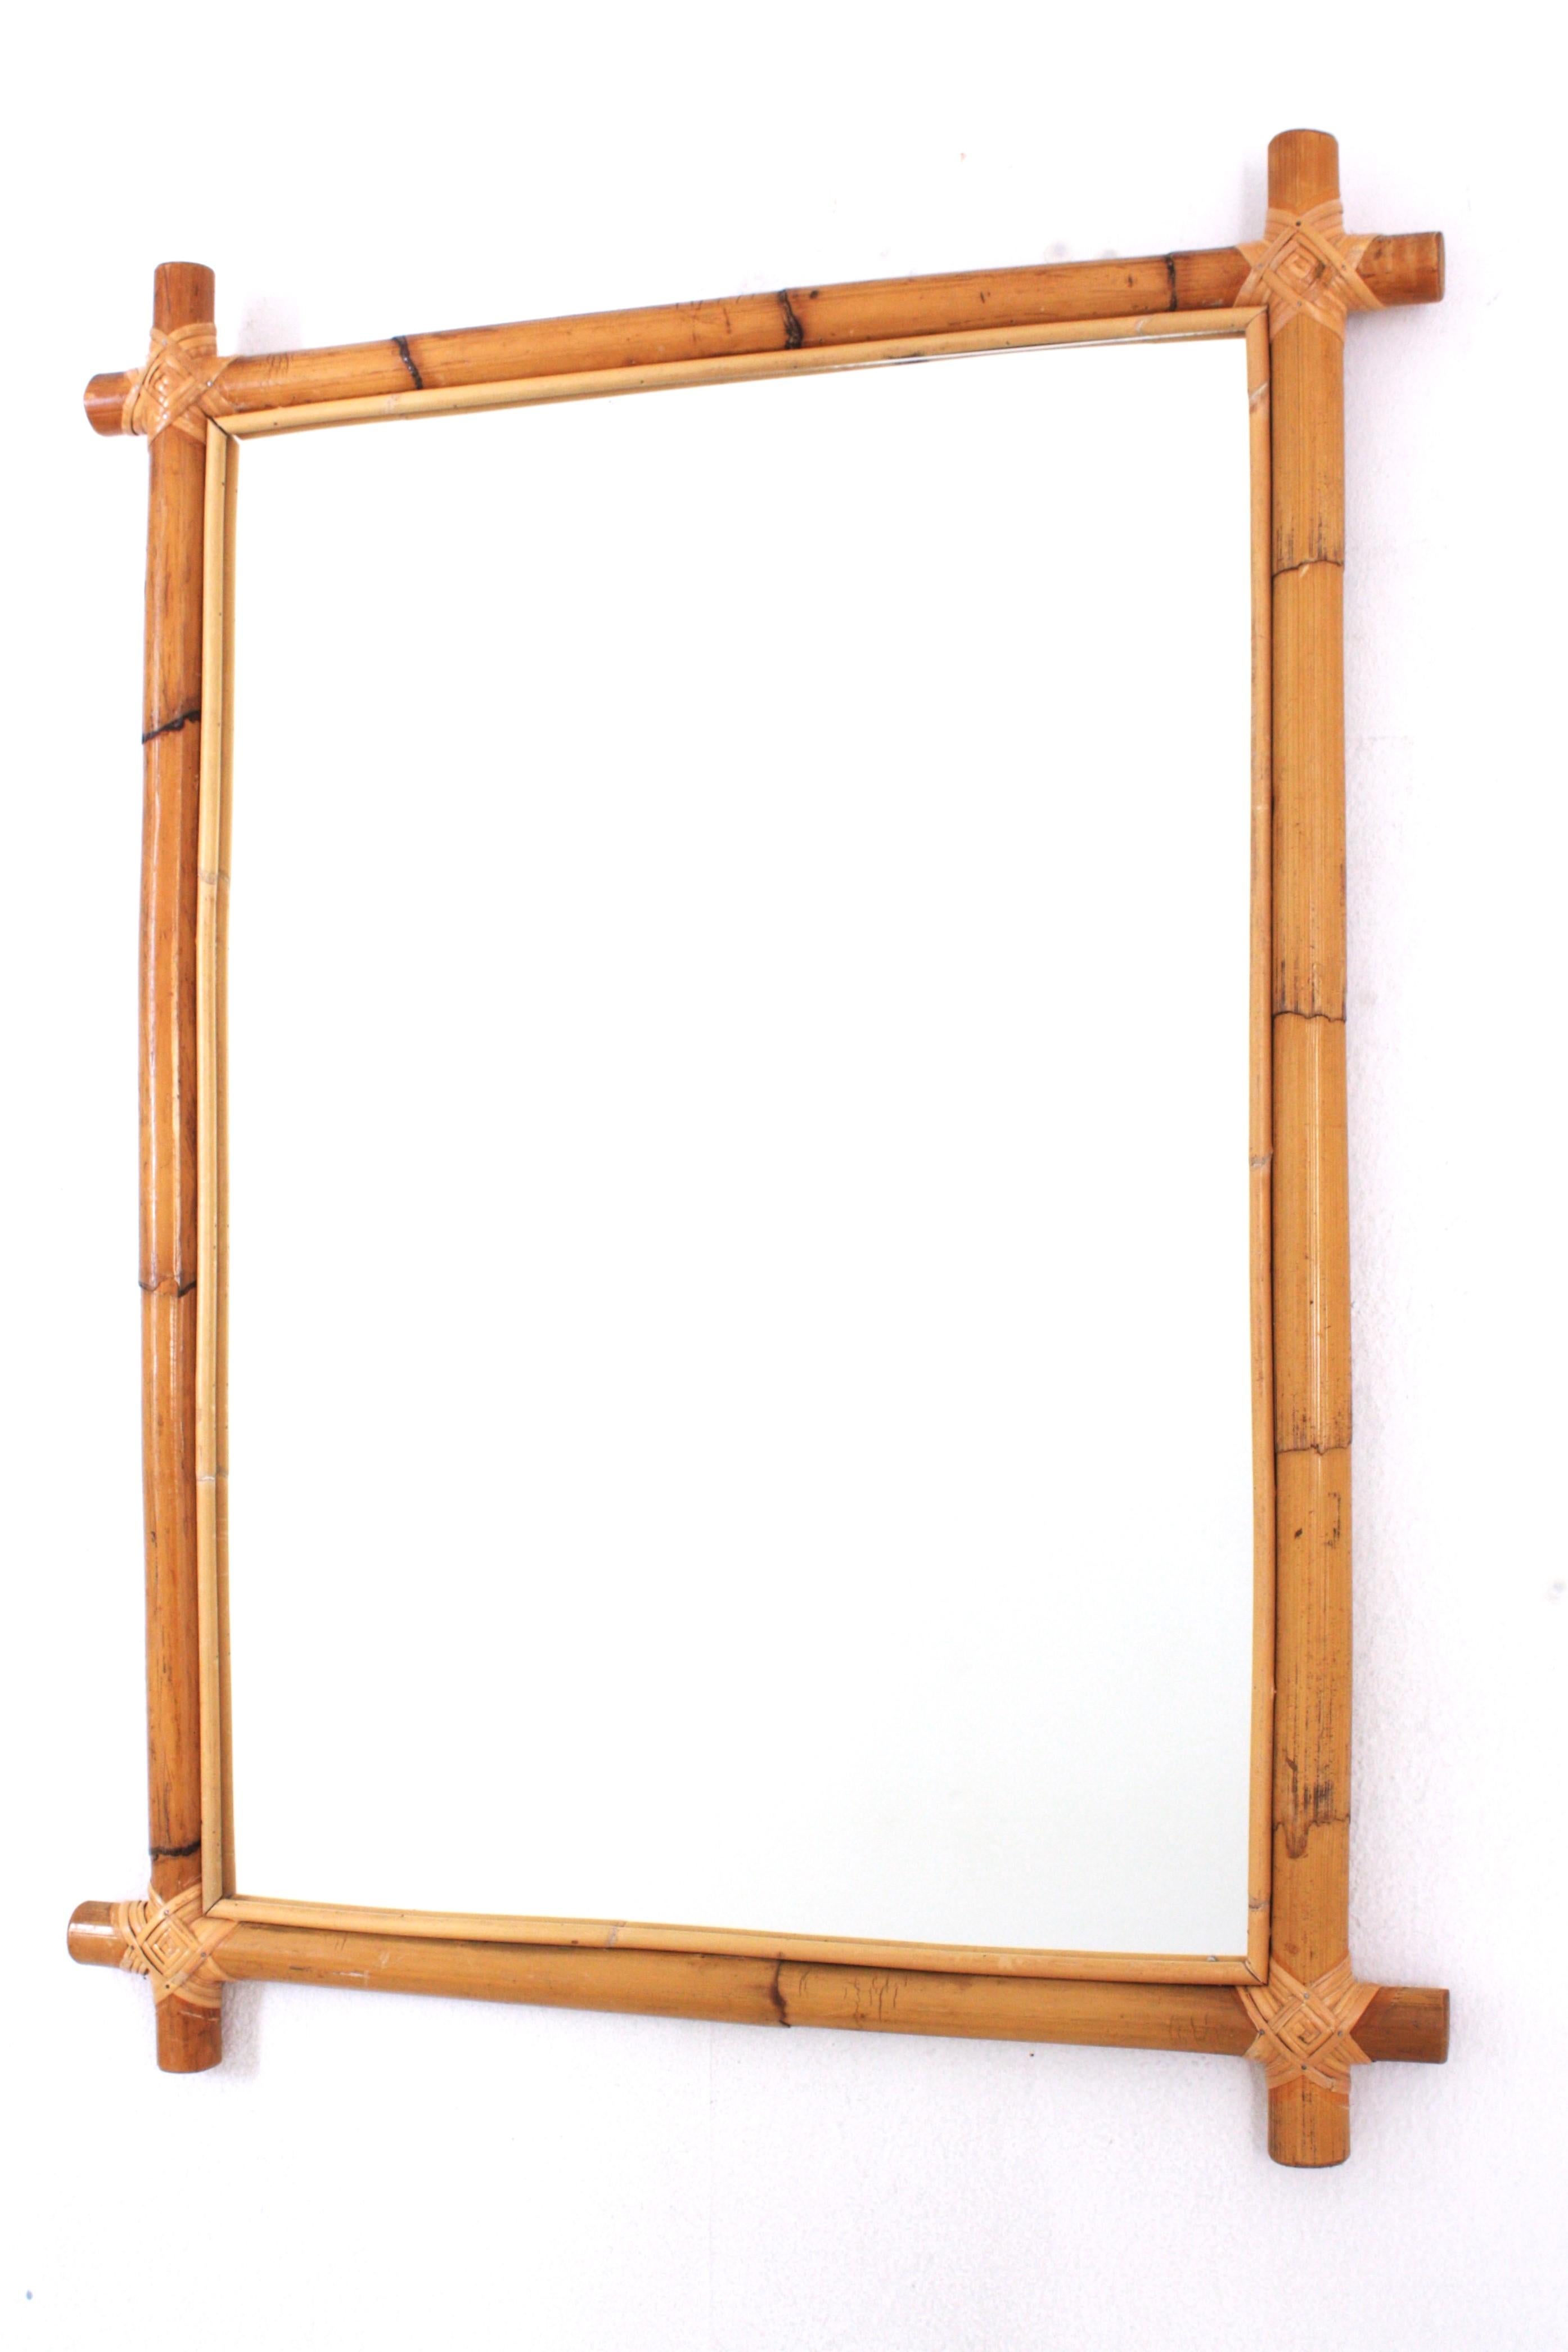 20th Century Large Rattan Bamboo Rectangular Mirror with Crossed Corners For Sale